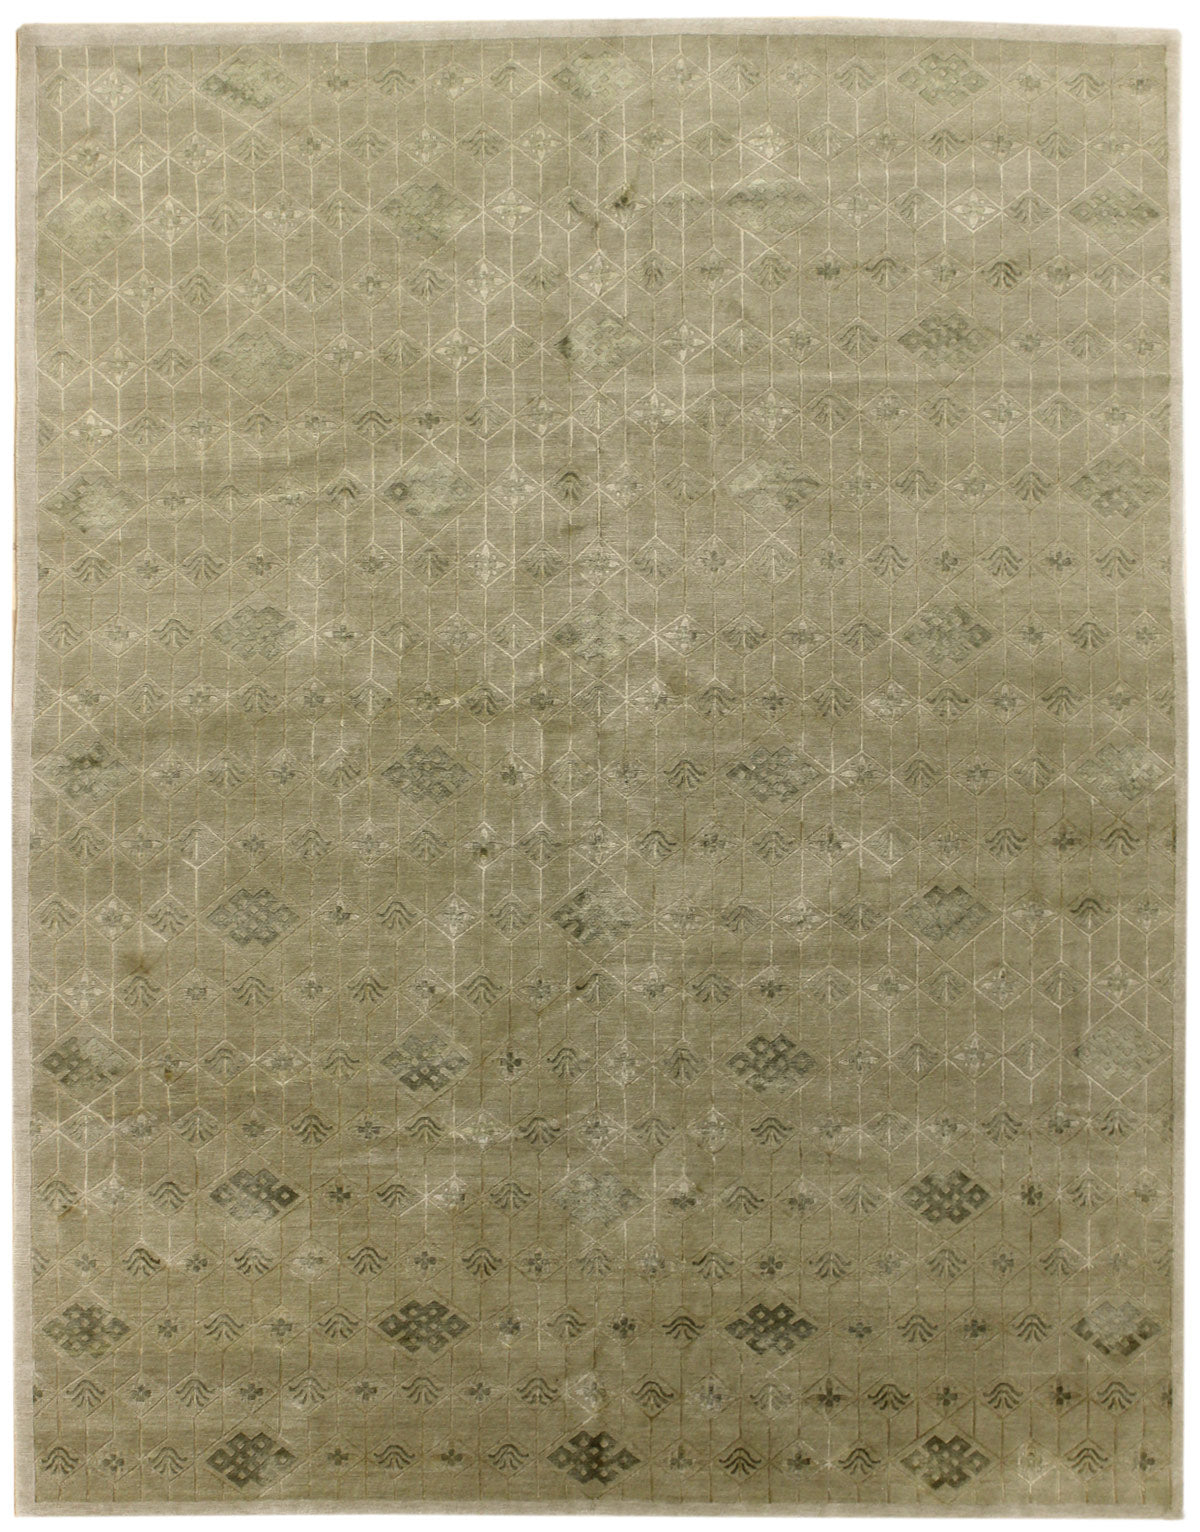 Endless Knots Handwoven Transitional Rug